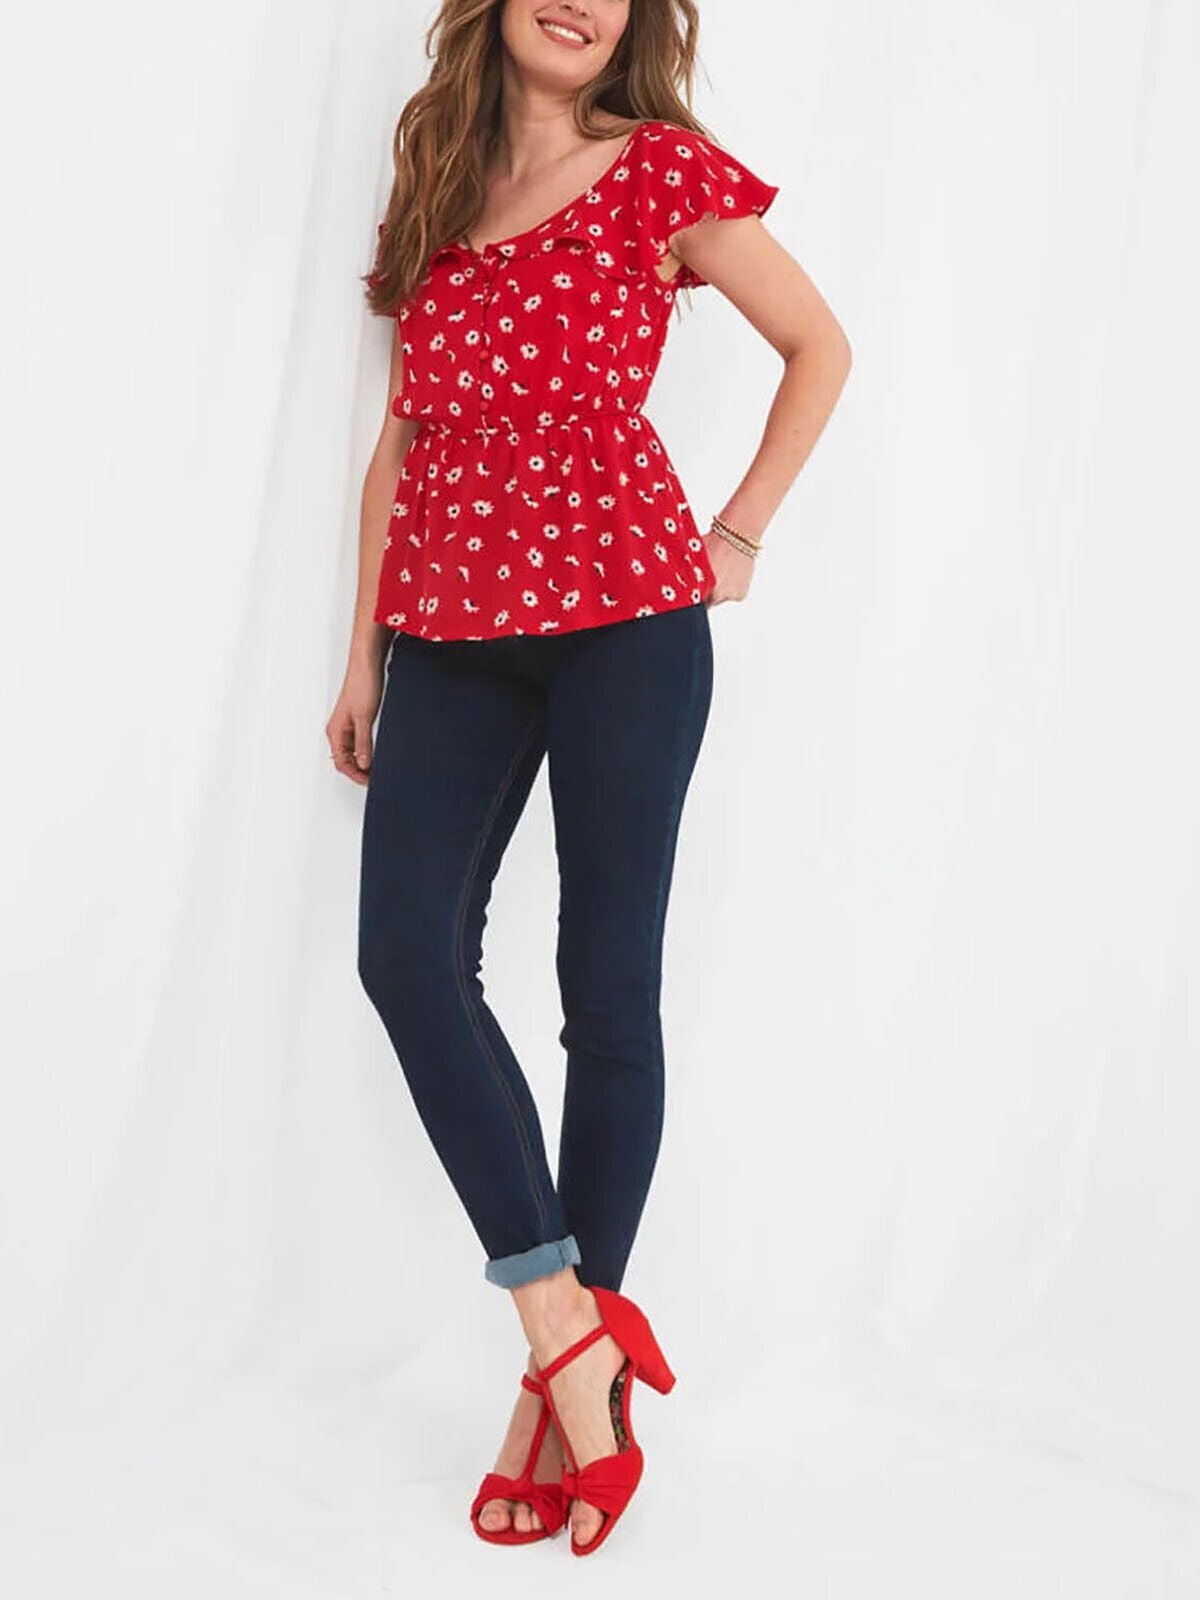 Joe Browns Red Fun And Flirty Top in Sizes 12, 14, 16, 18 RRP £35